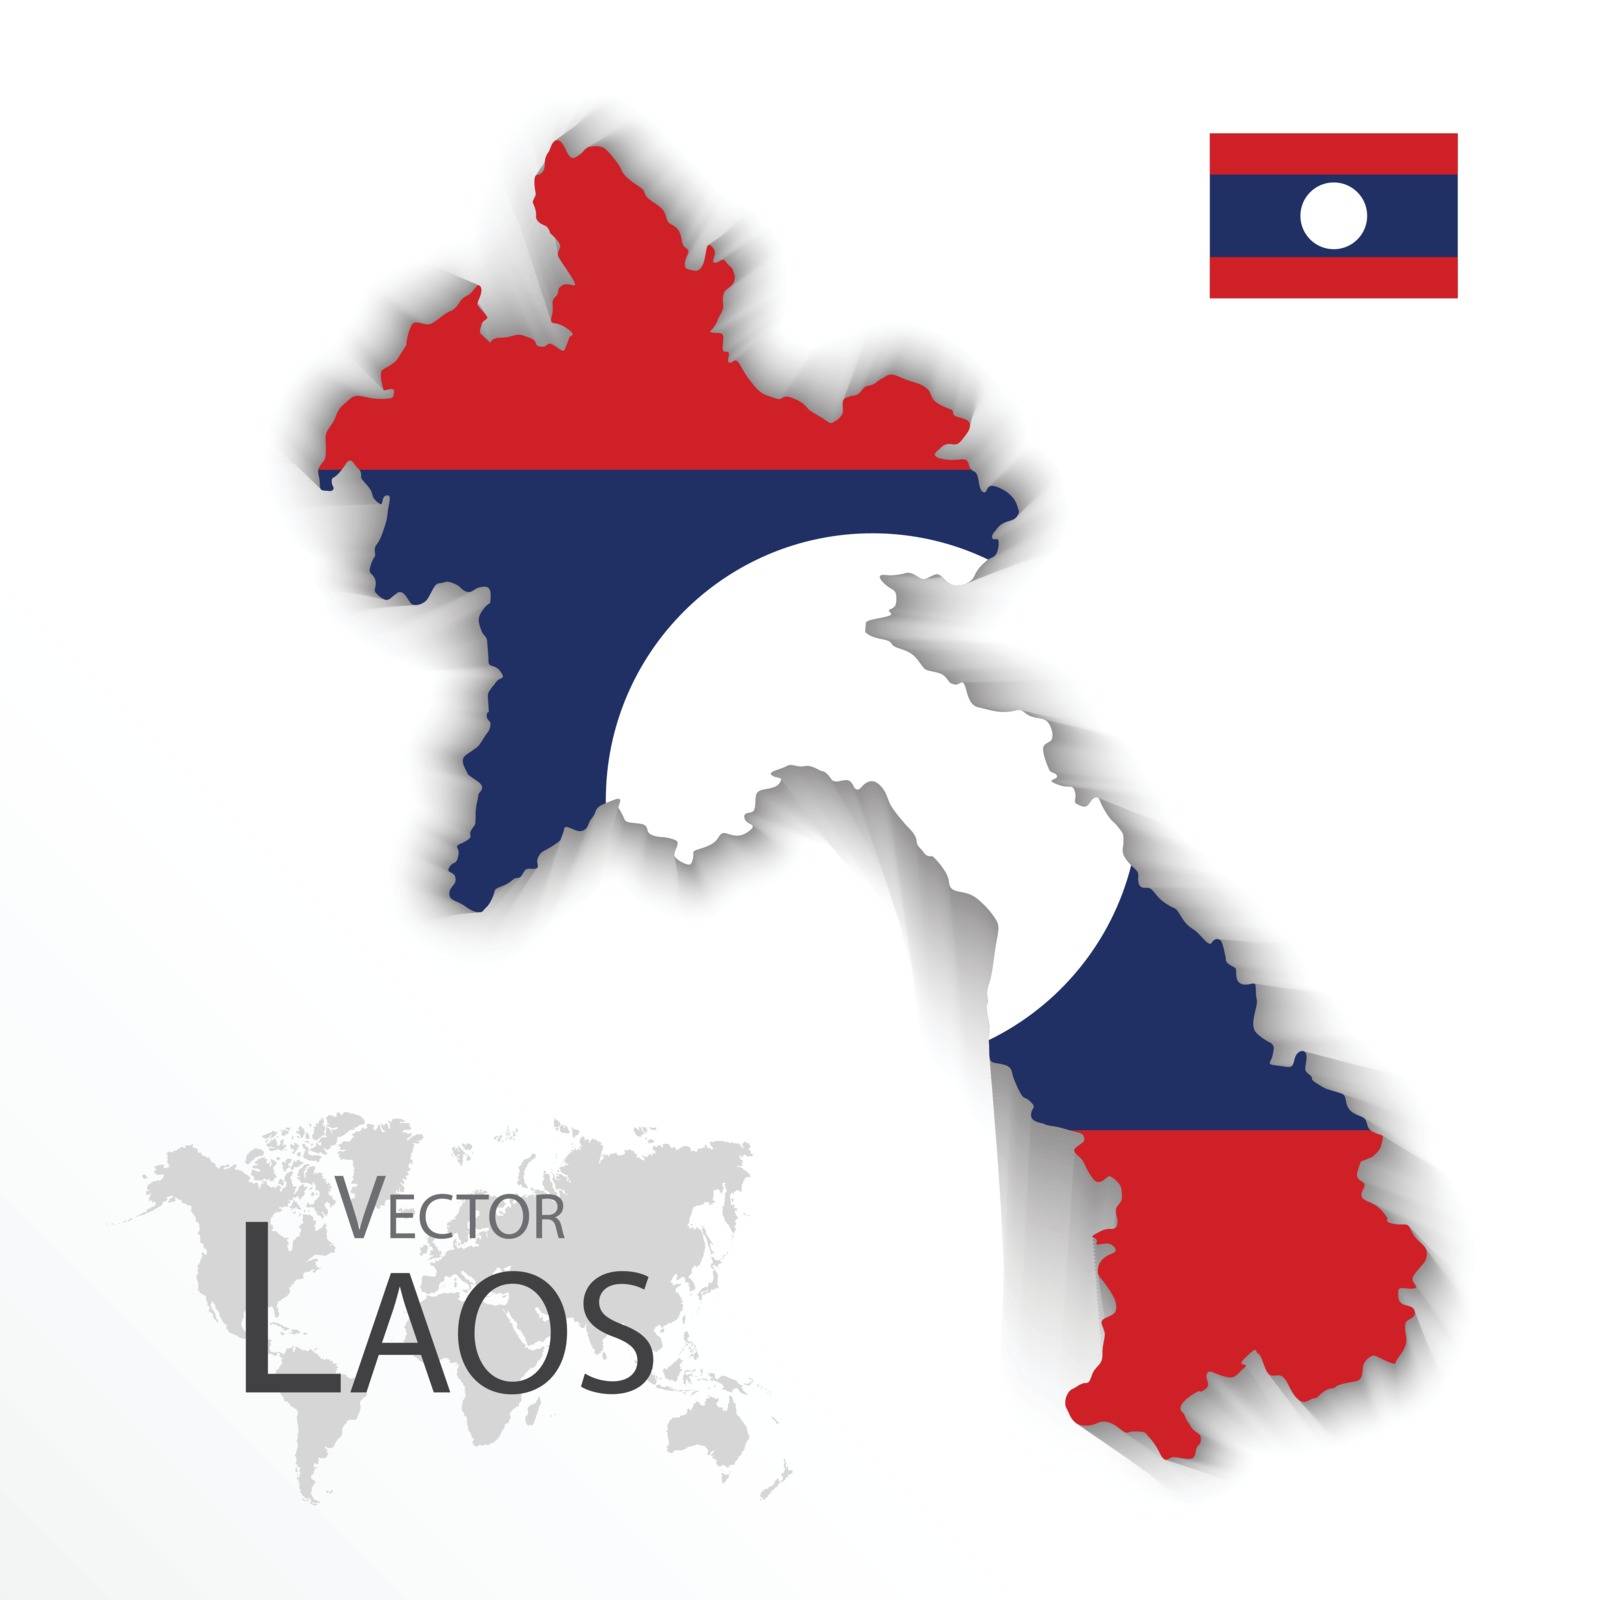 Laos ( People 's Democratic Republic of Laos ) ( map and flag ) ( transportation and tourism concept ) , laos is one of AEC ( ASEAN Economic Community ) by stockdevil